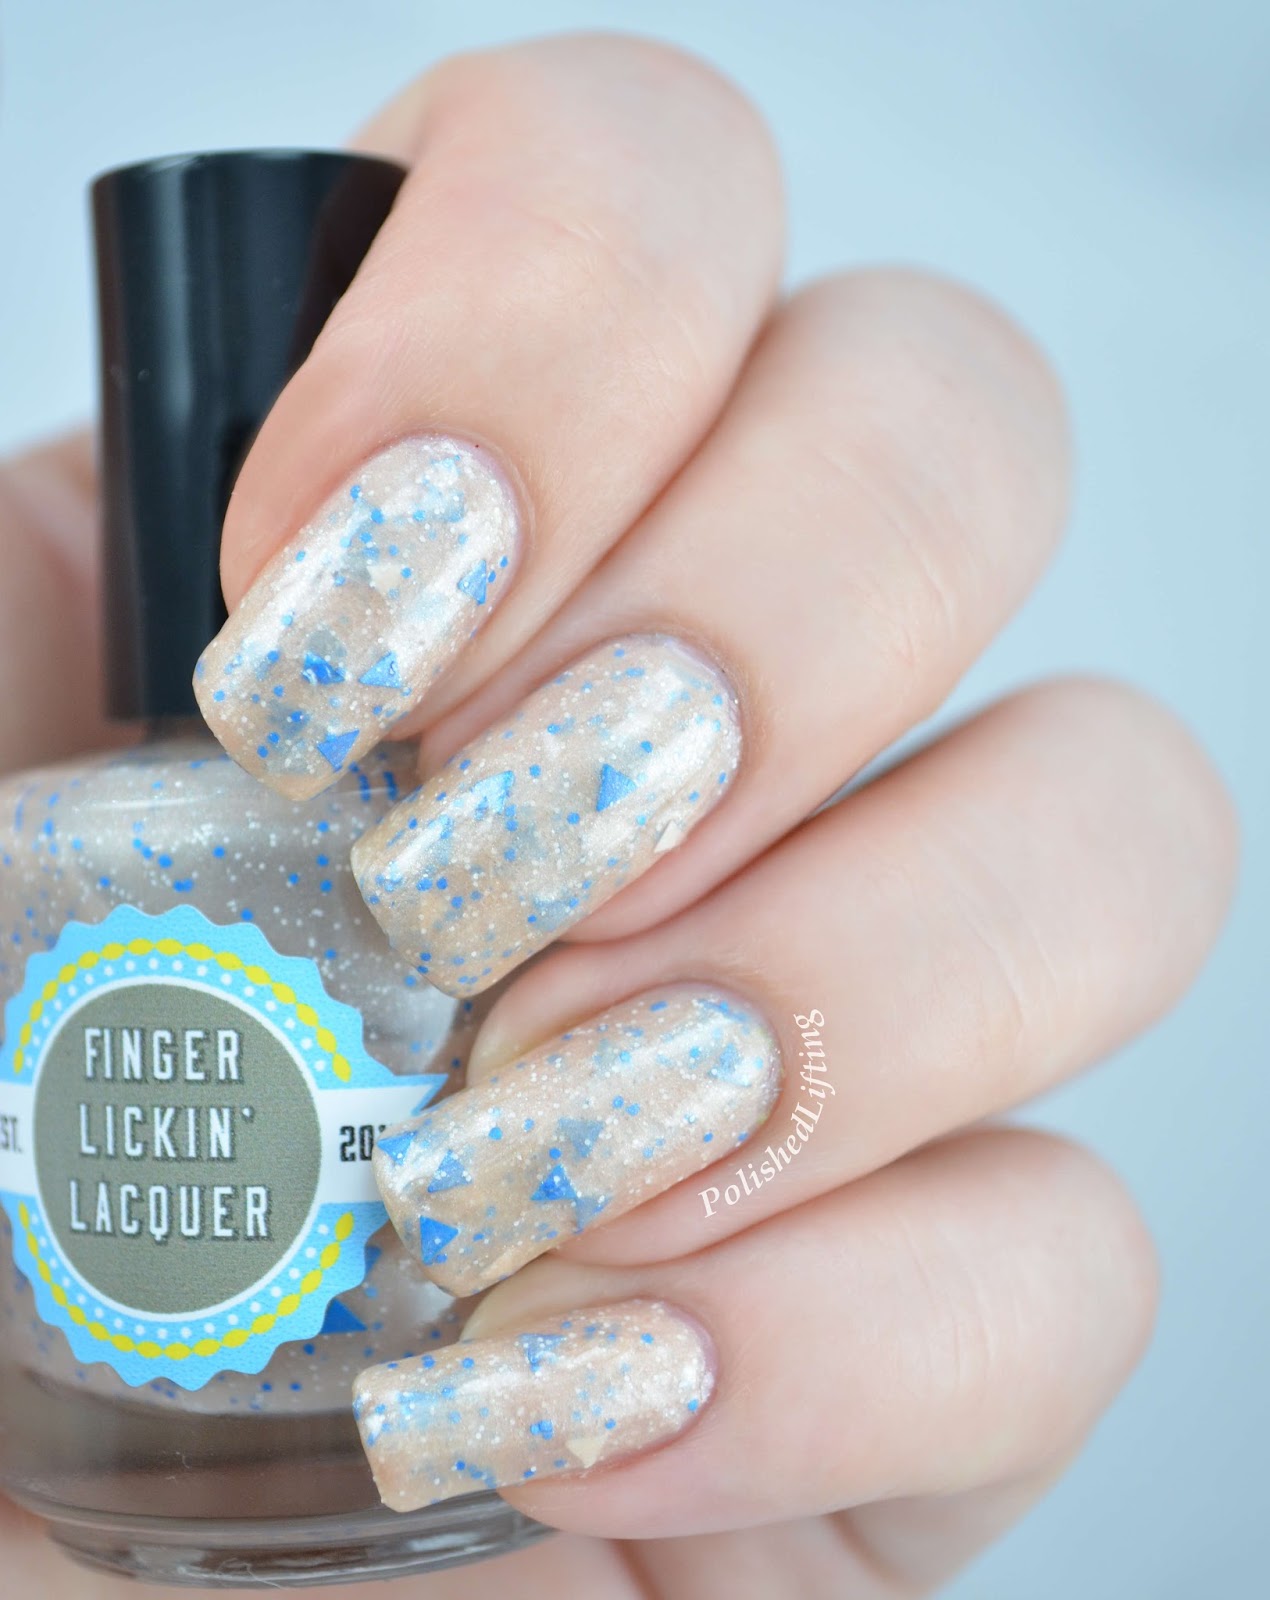 Finger Lickin' Lacquer Totally Rad You've Got Mail